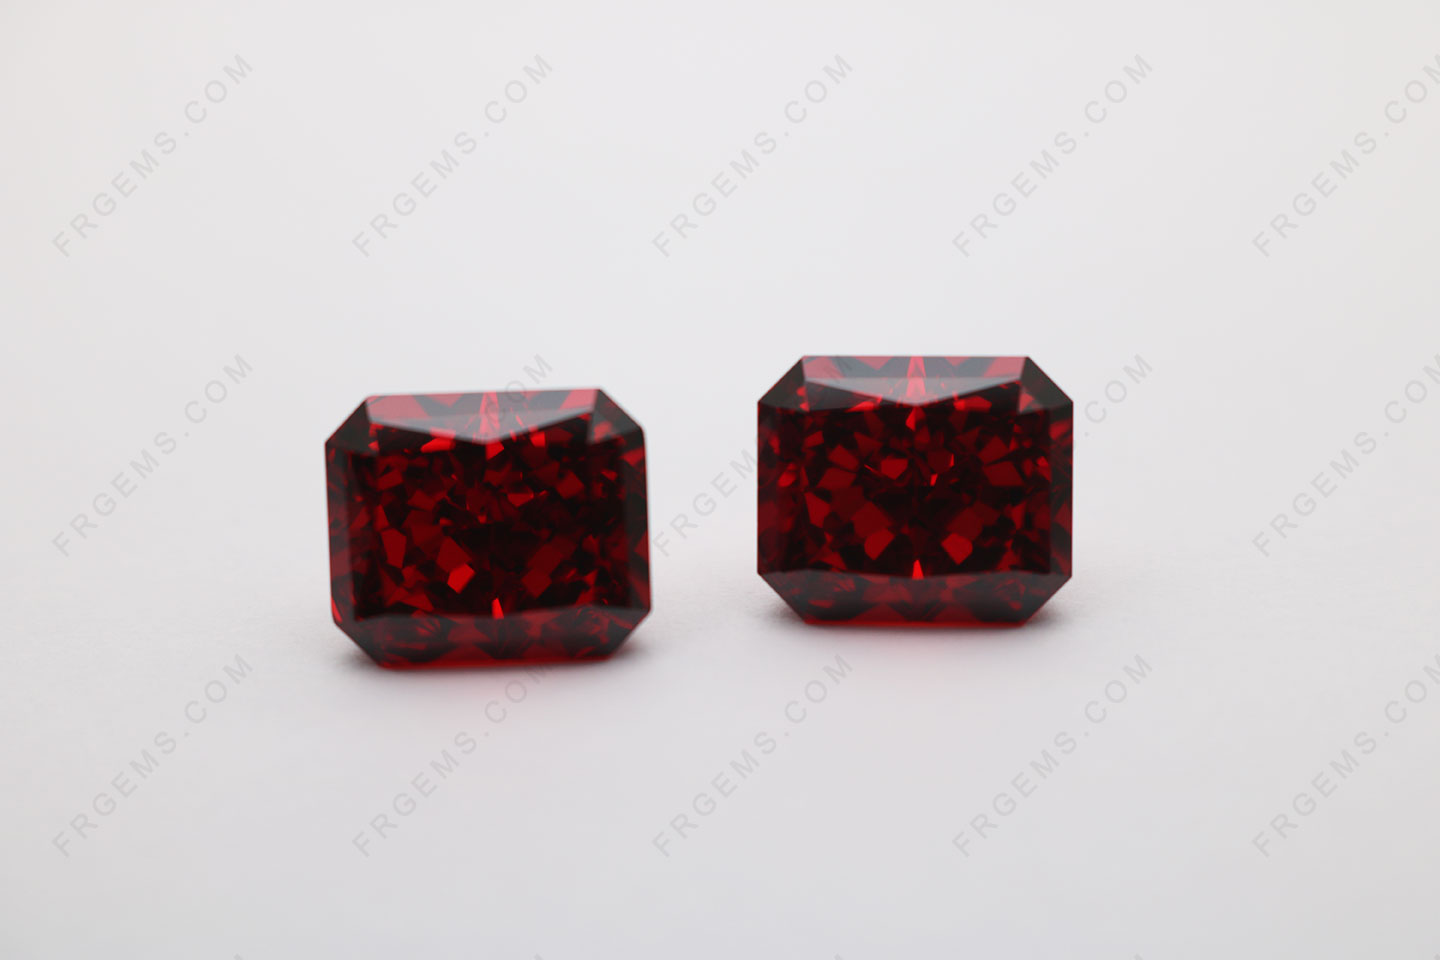 Cubic Zirconia Octagon Crushed Ice Cut Garnet Red Color 5A Top Best Quality Loose Gemstones